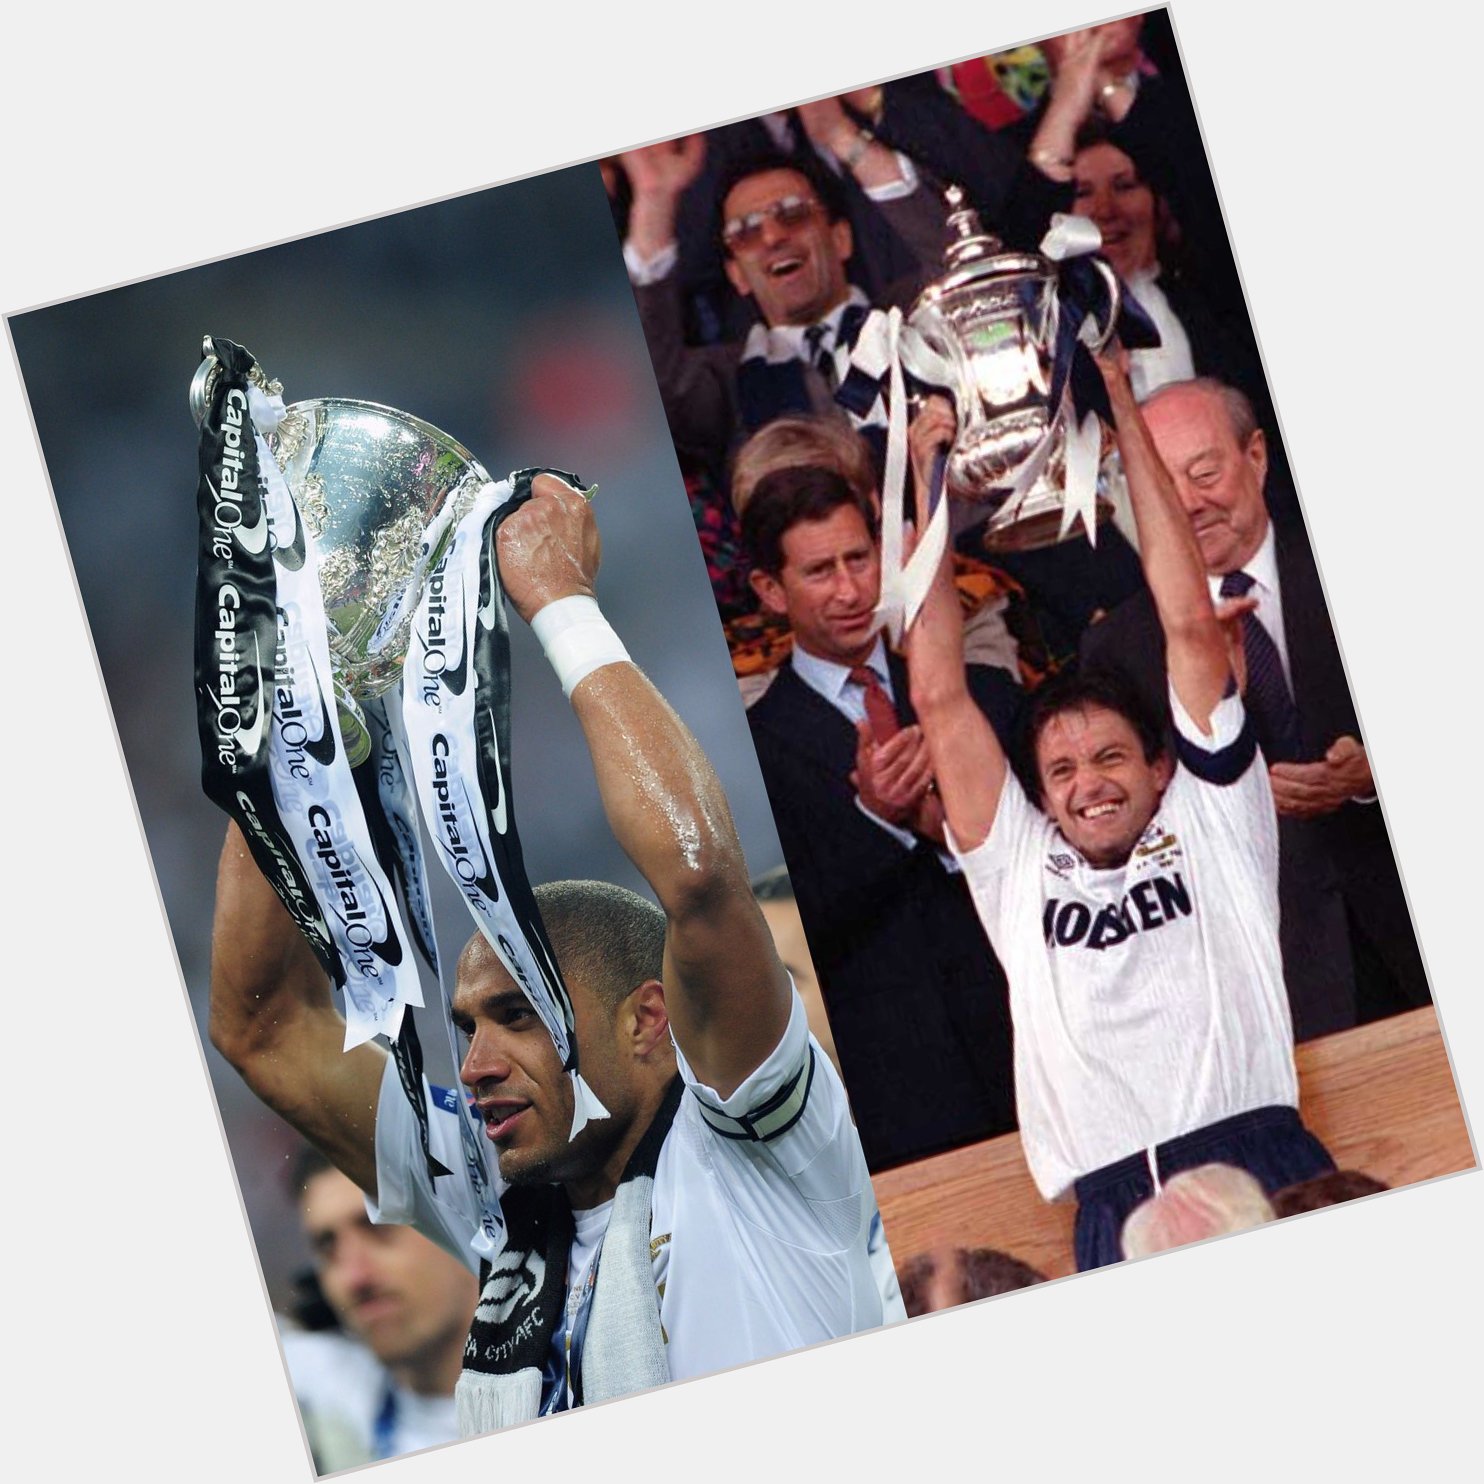 Happy birthday to two cup winning captains, Ashley Williams and legend Gary Mabbutt   